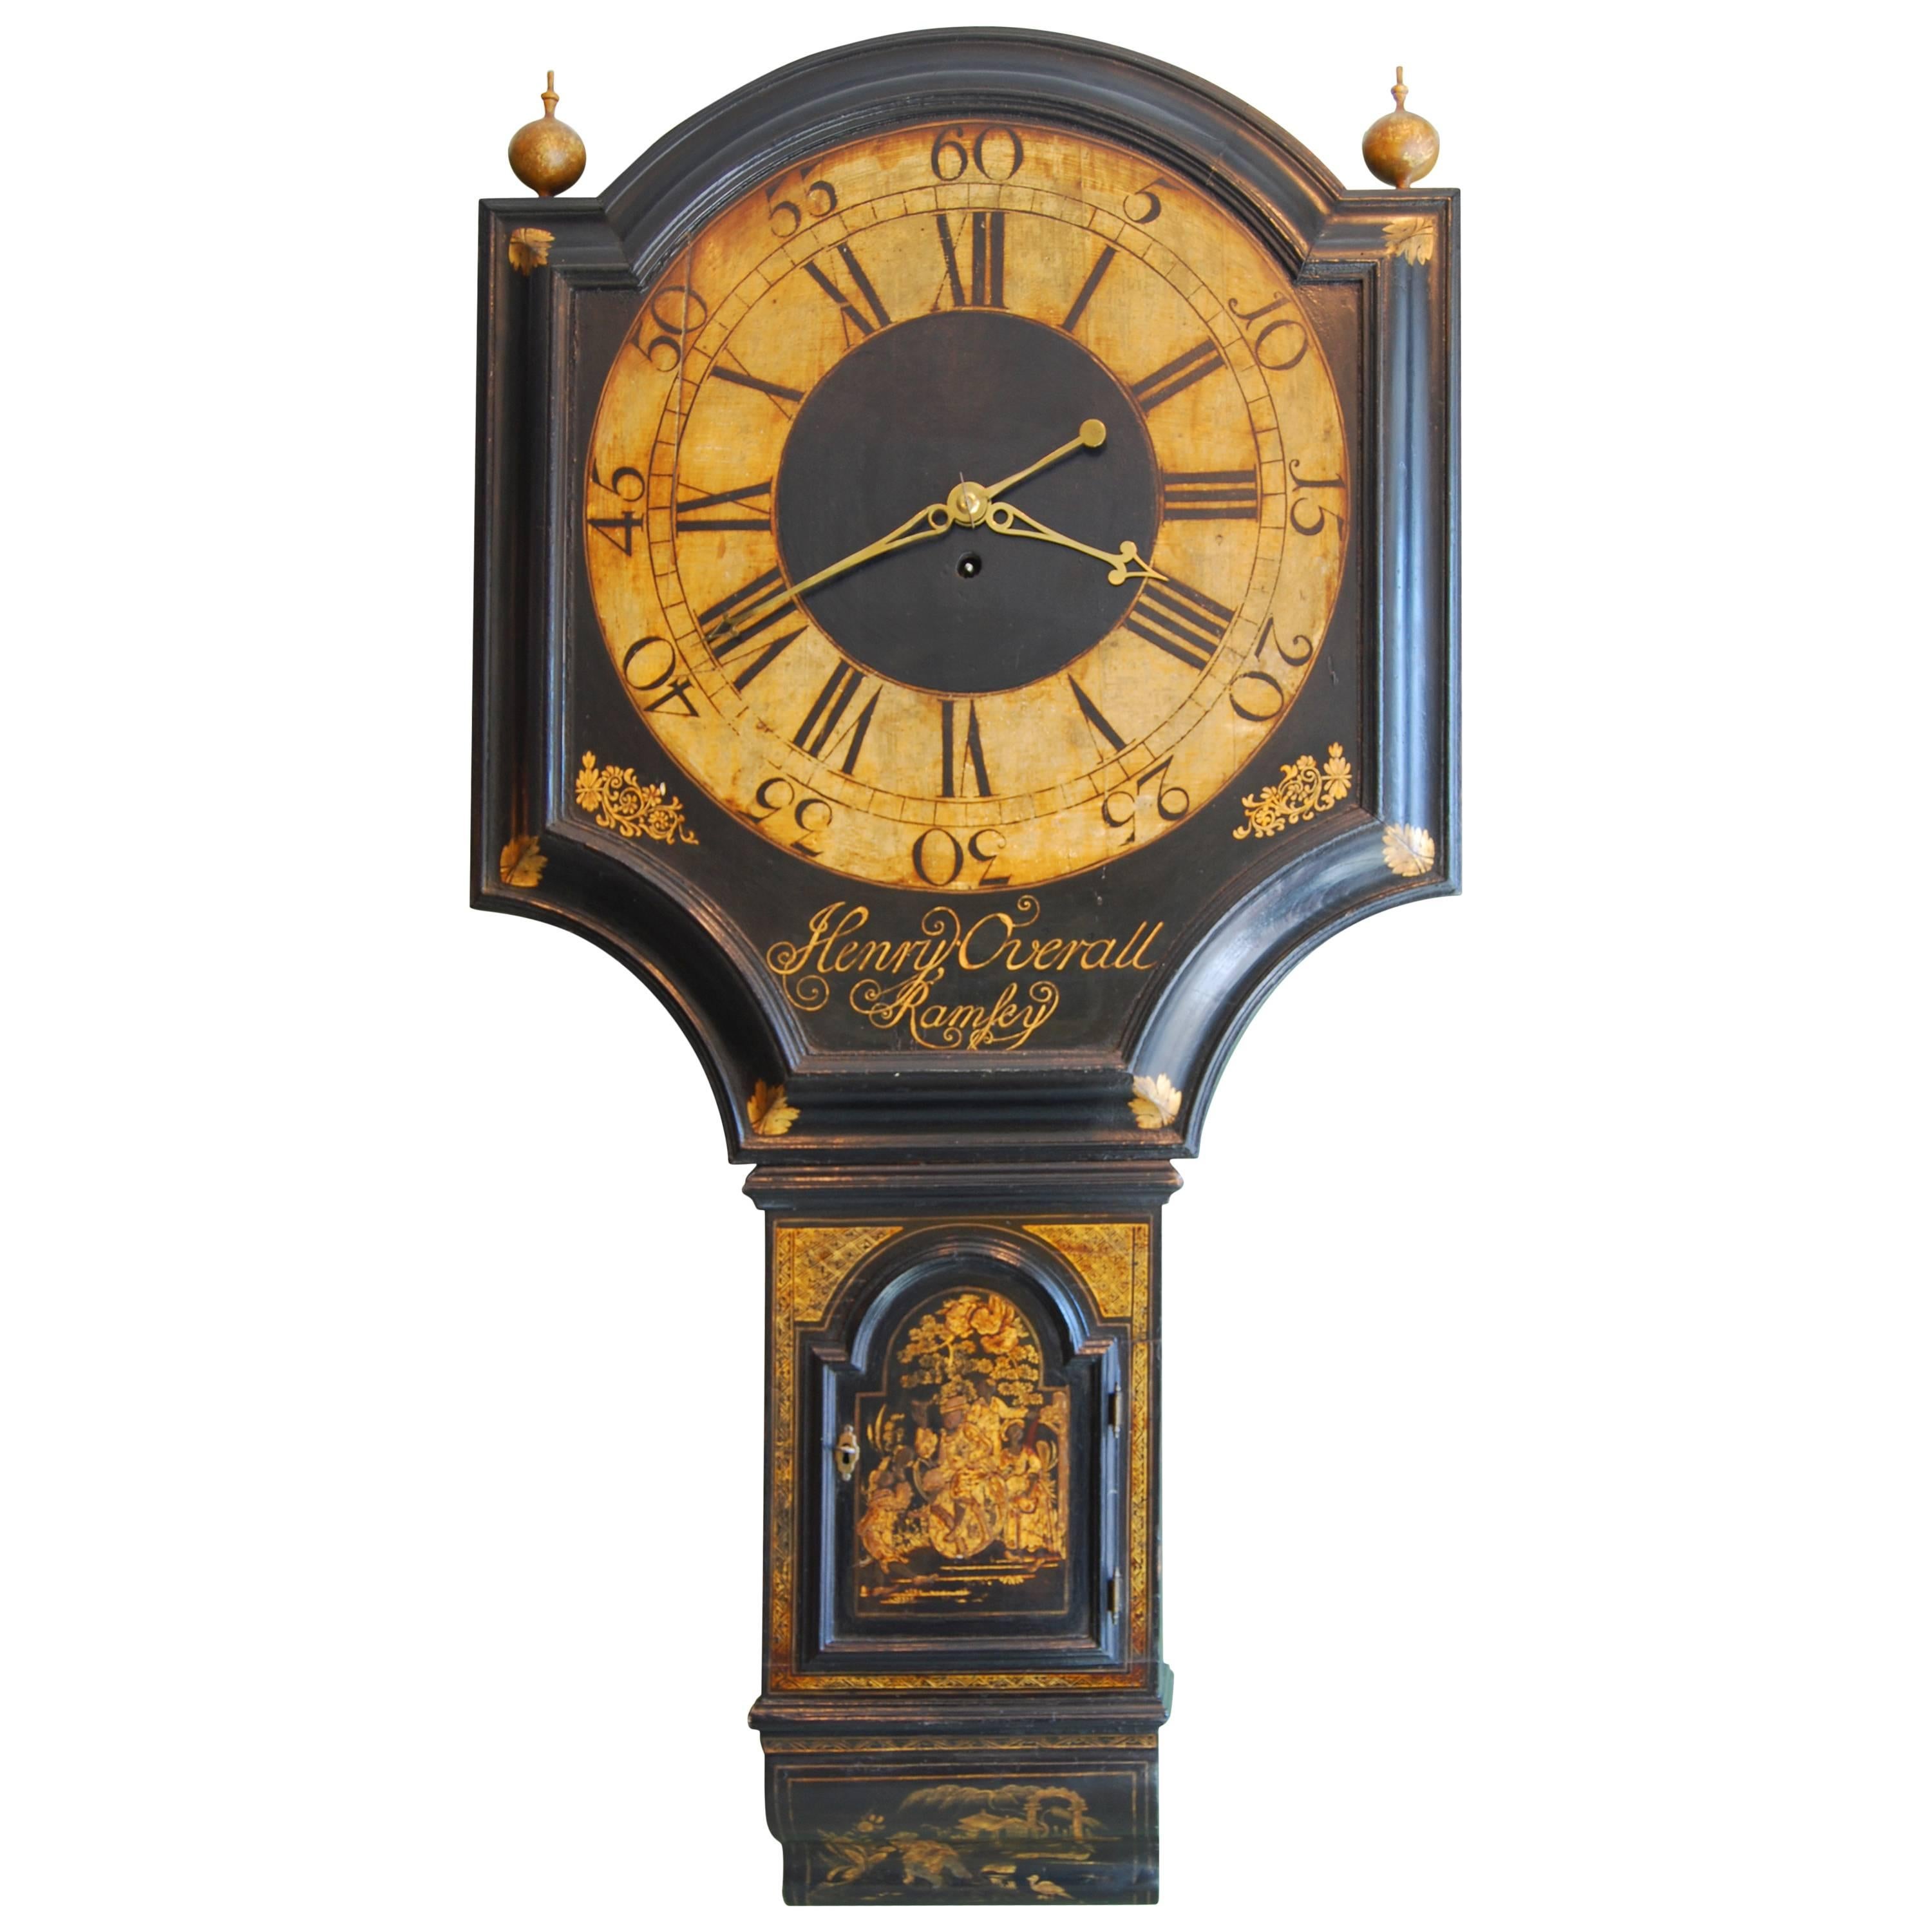 A truly rare and exceptional George III period black lacquer Tavern Clock by Henry Overall, Ramsey.

This has an access door to the right side and a shallow concave moulded foot. The shield dial is well proportioned and the broad moulded surround